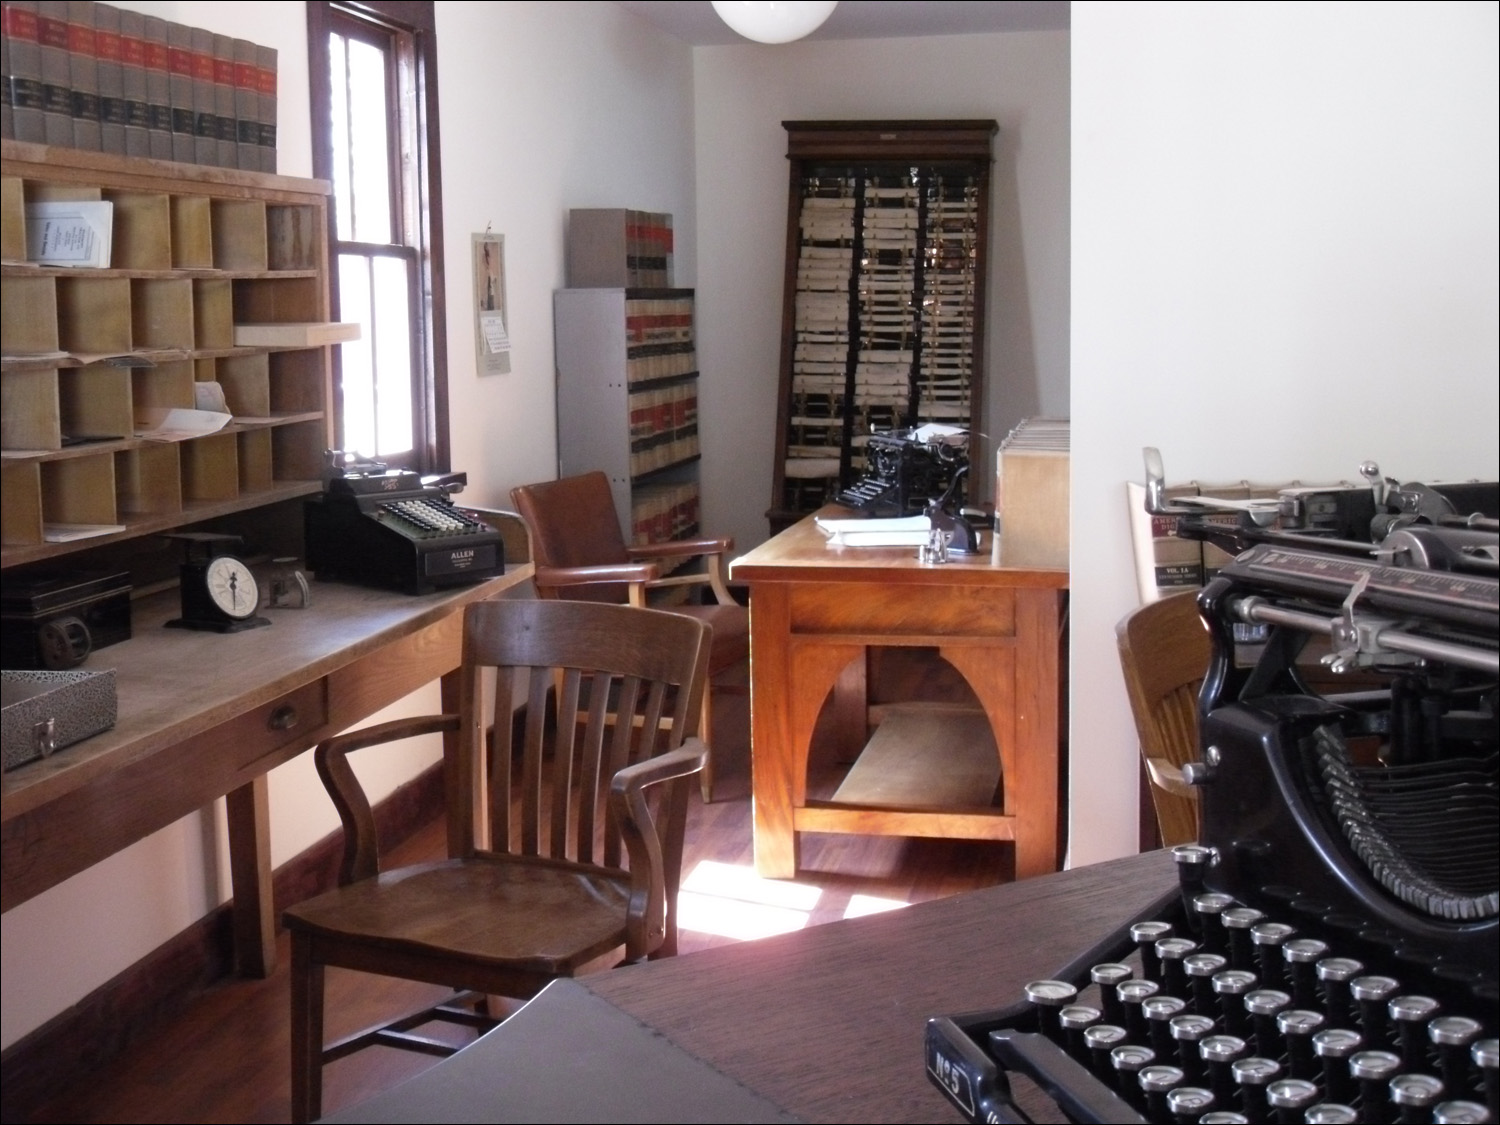 Fort Benton, MT Agriculture Museum-lawyer's office